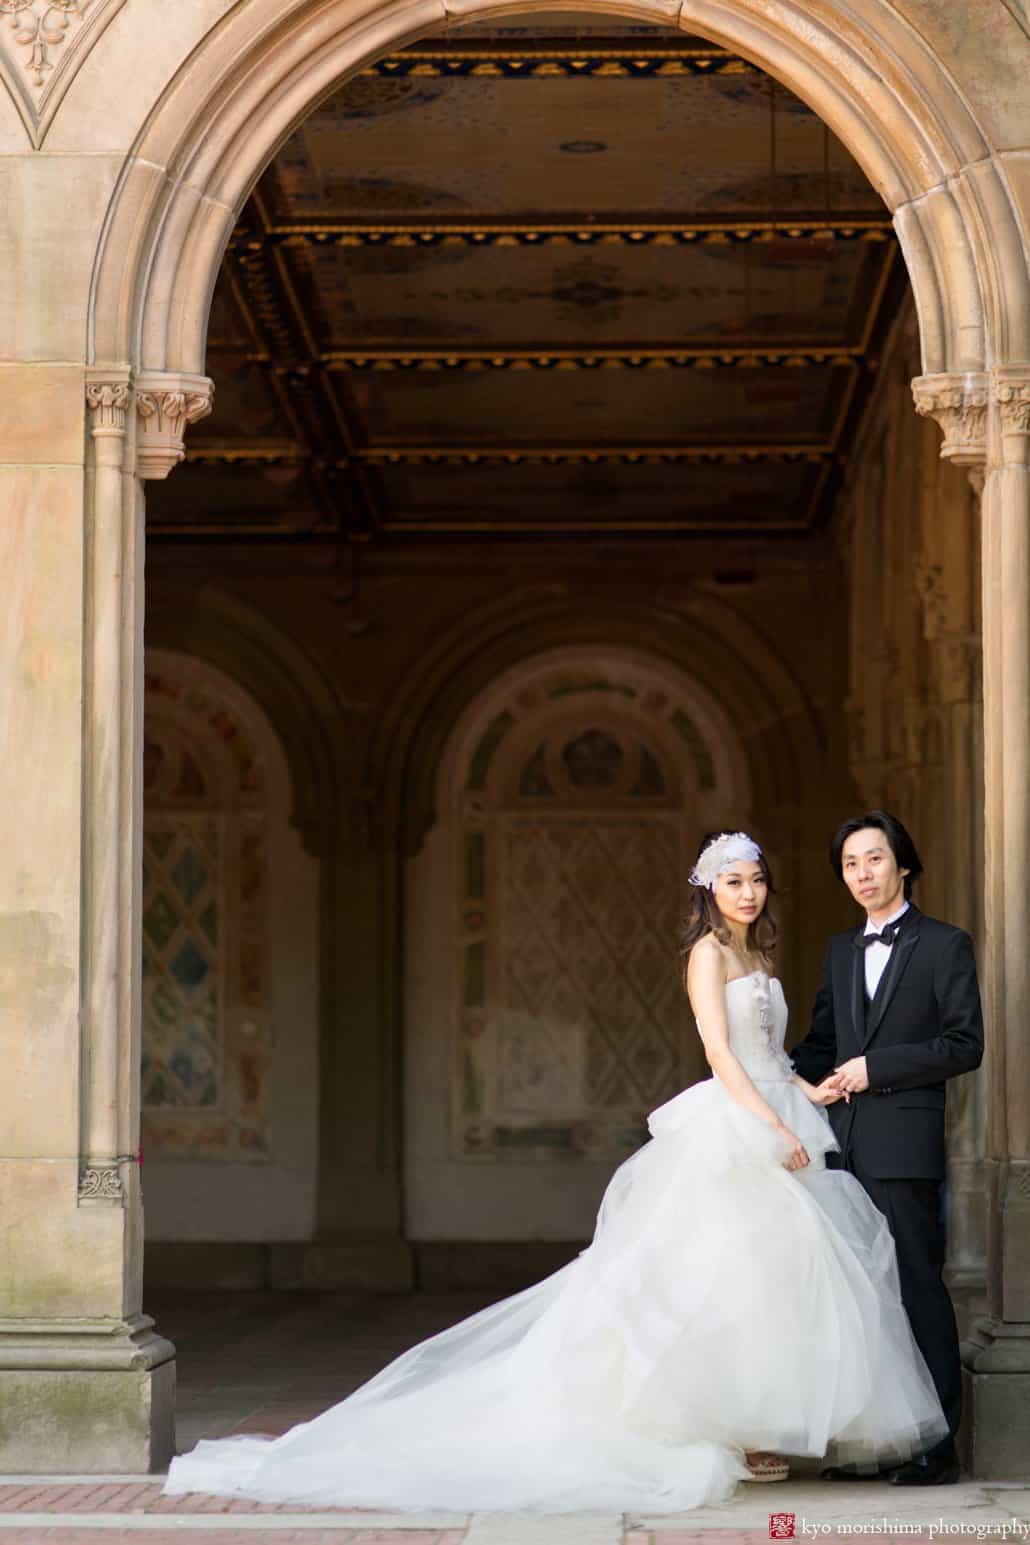 Couple on their Japanese wedding photo tour of NYC pose for a portrait in Central Park at Bethesda Terrace photographed by Japanese wedding photographer Kyo Morishima